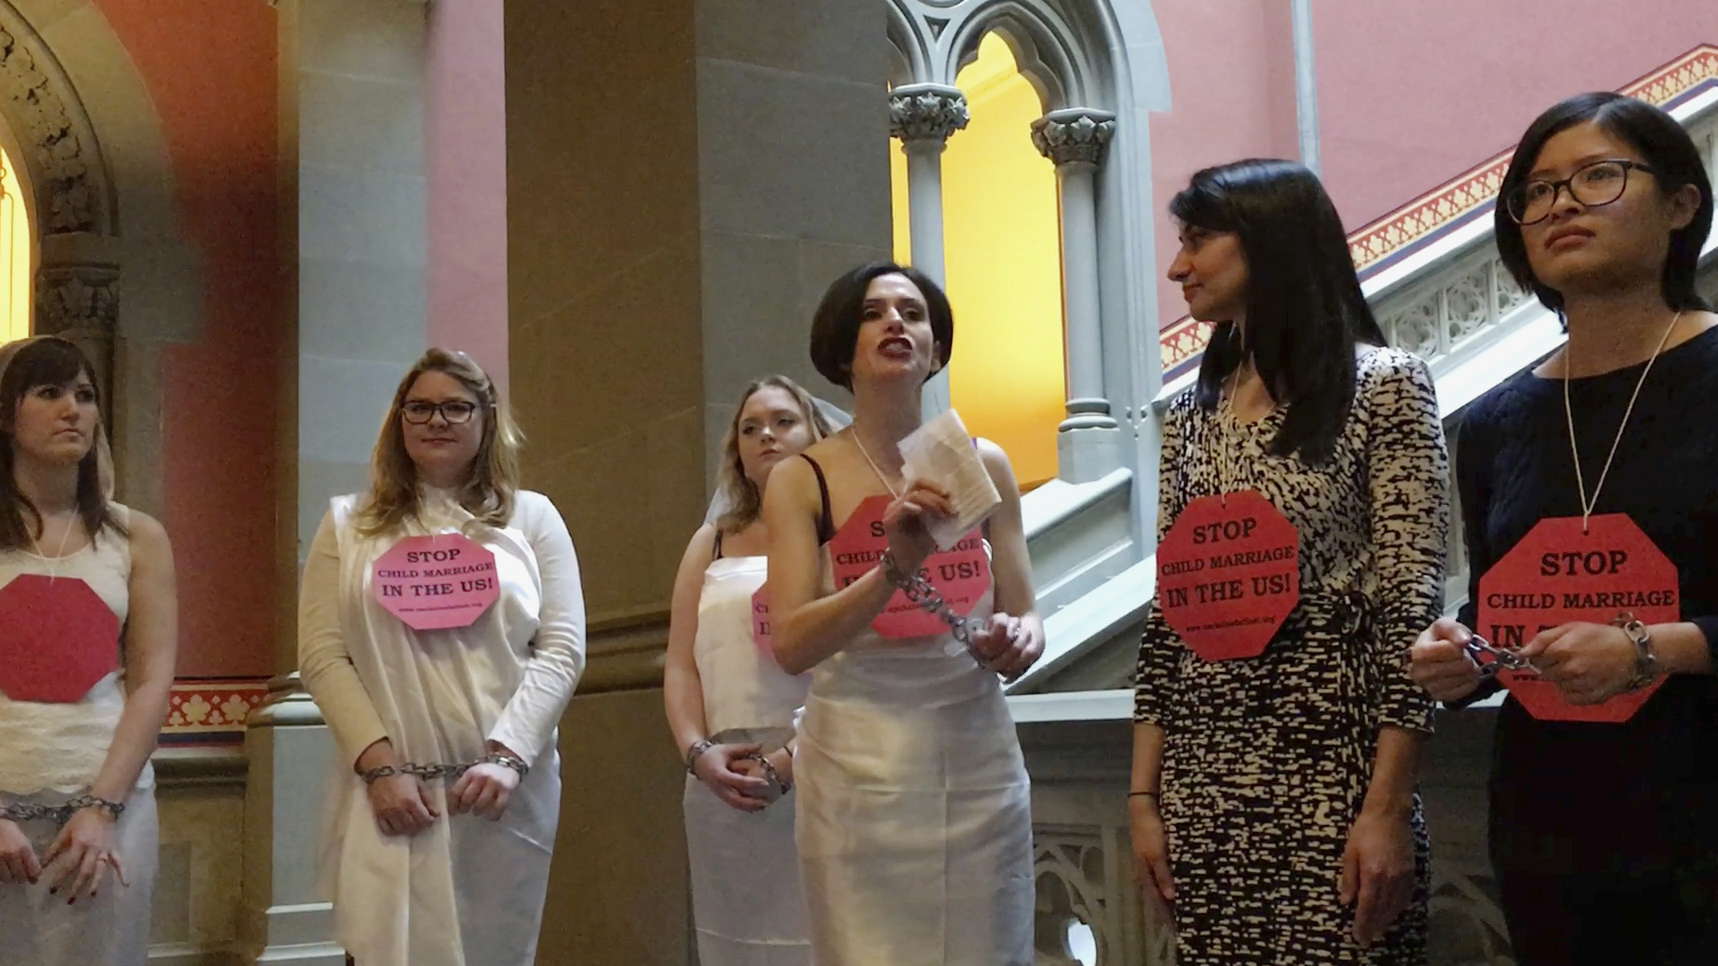 Fraidy Reiss, founder and director of Unchained at Last, a non-profit organization with the goal to end child marriages, with other women at the Capitol in Albany to fight against the law that allows children as young as 14 to wed.